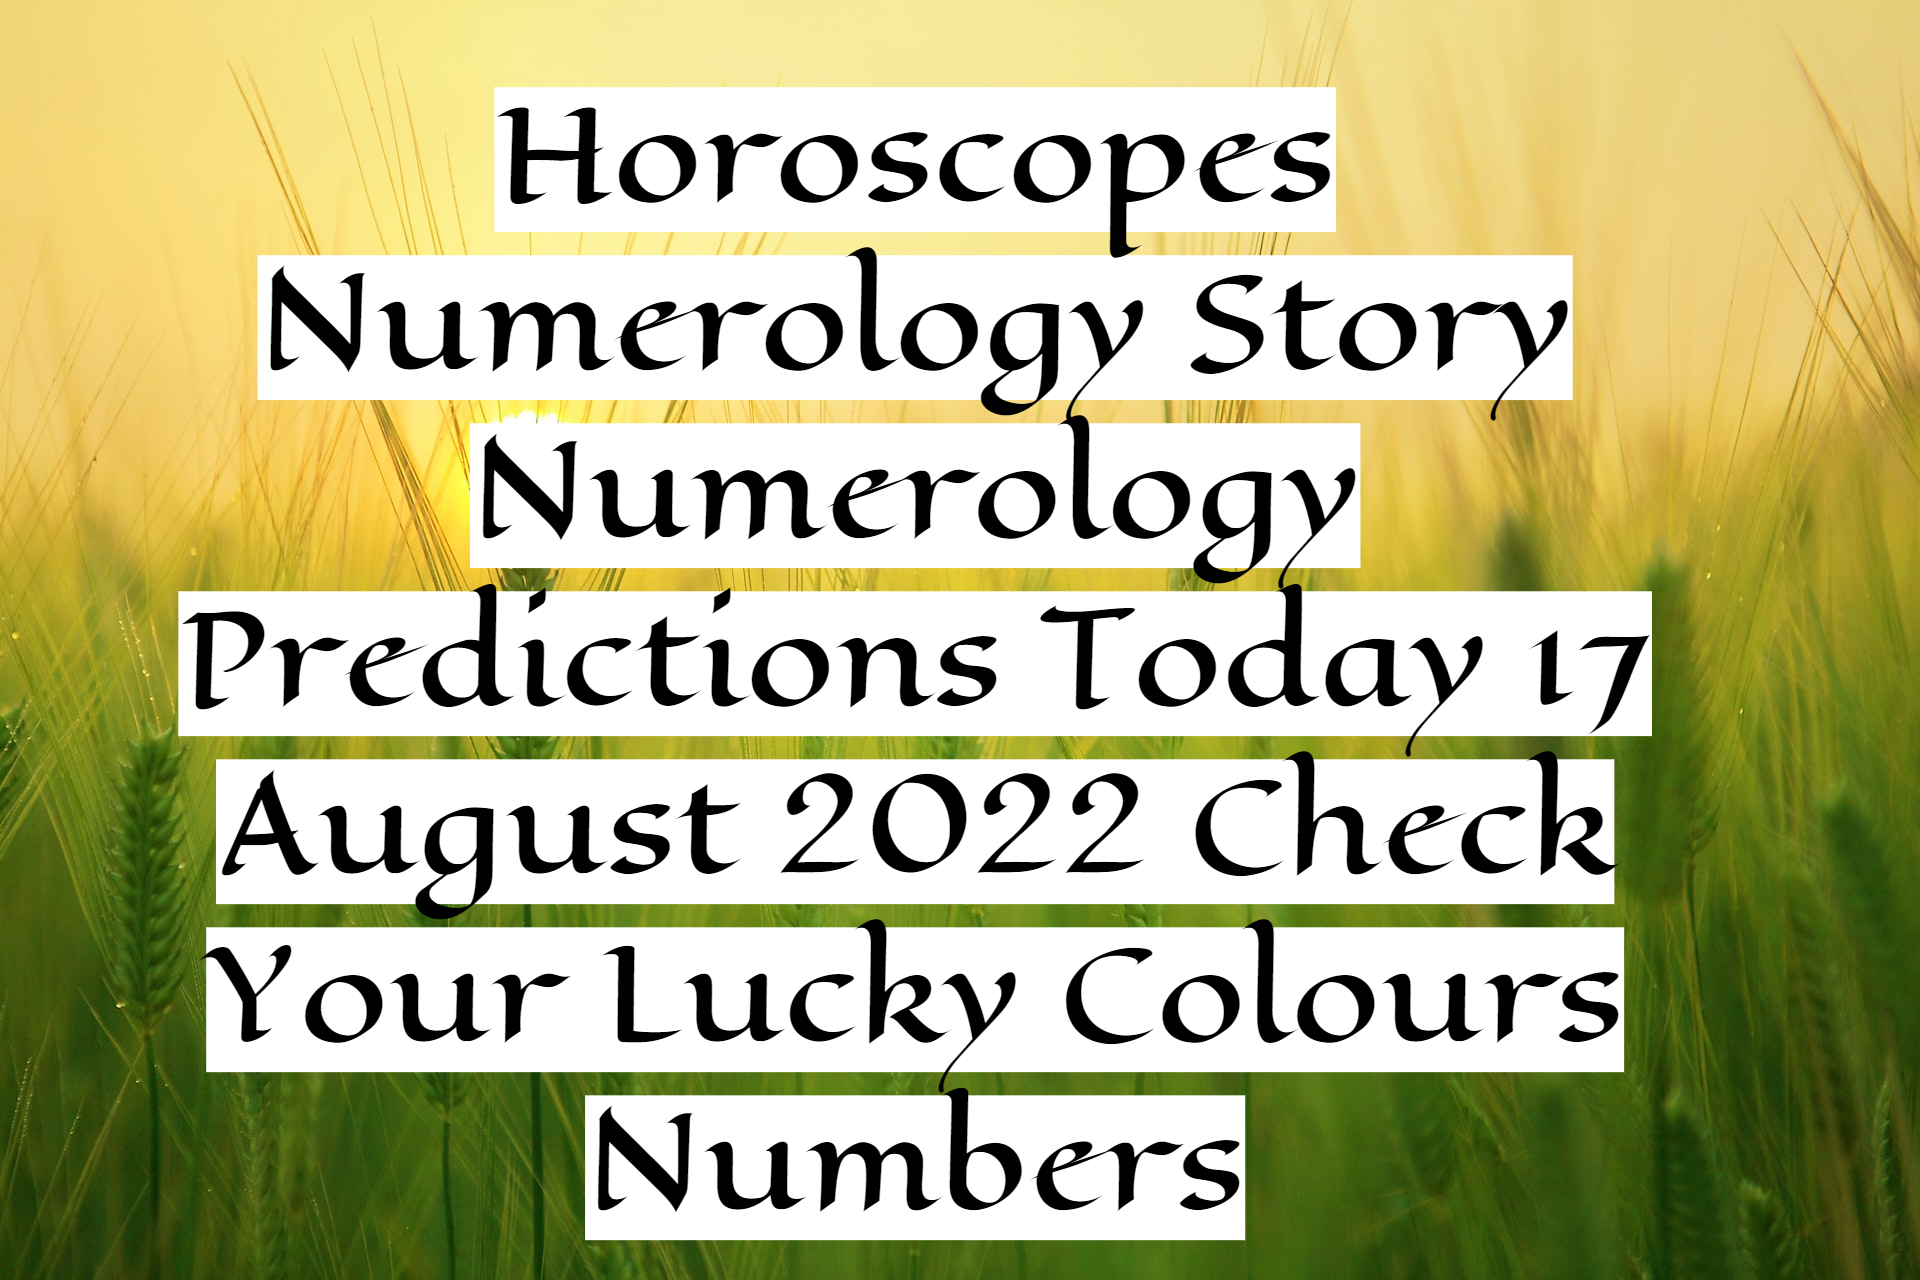 Horoscopes Numerology Story Numerology Predictions Today 17 August 2022 Check Your Lucky Colours Numbers